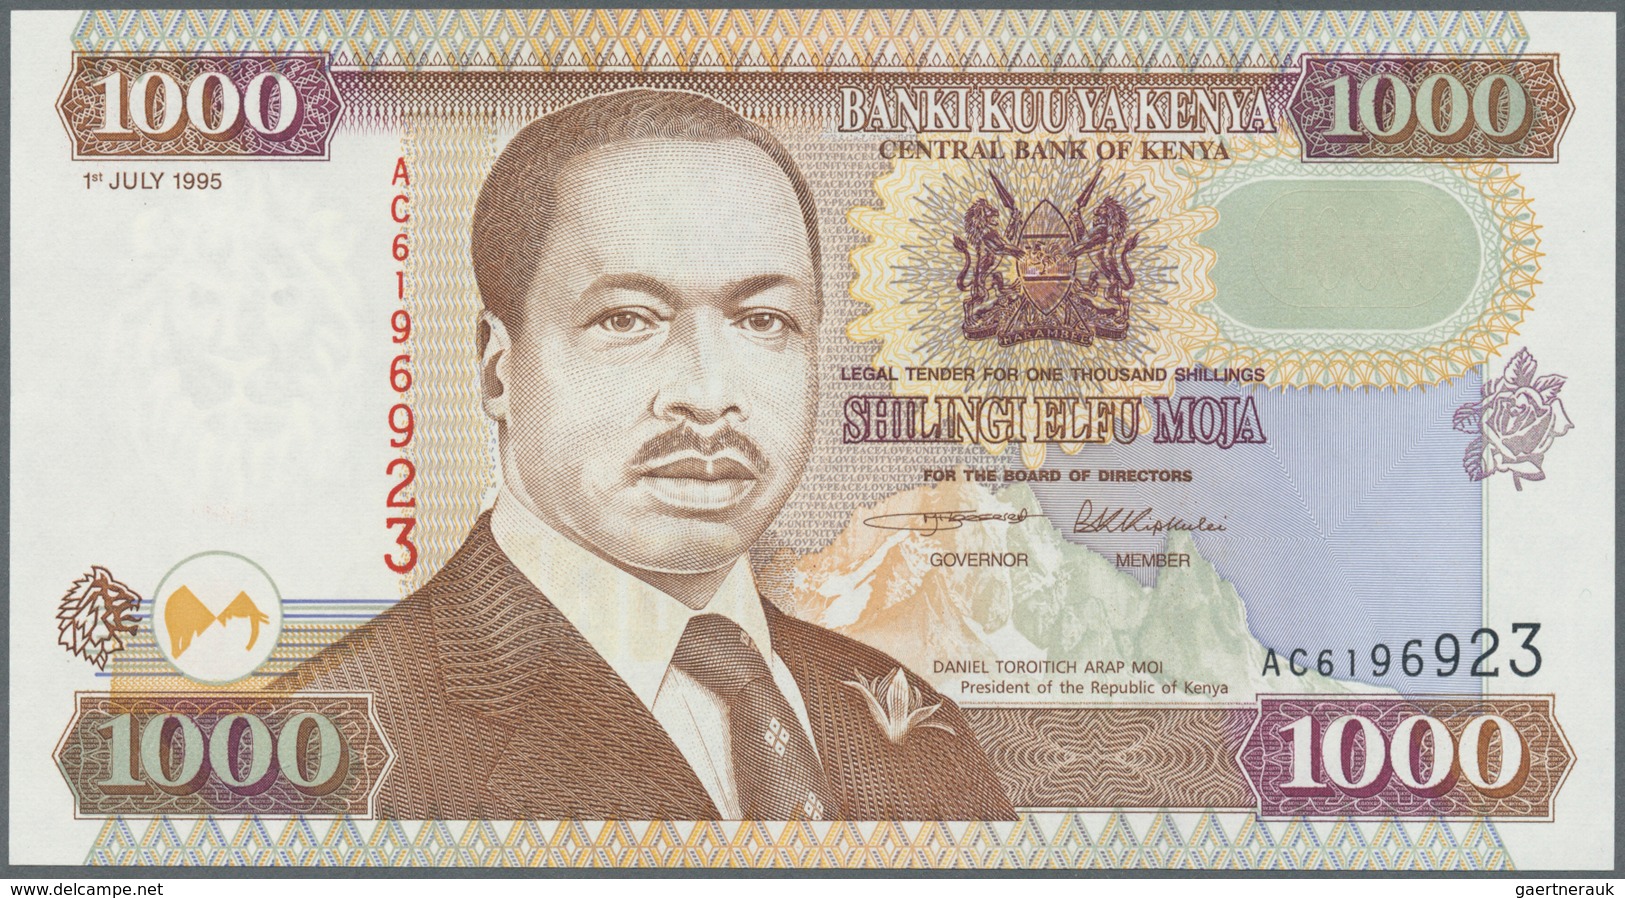 Africa / Afrika: Collectors book with 81 Banknotes from Kenya, Lesotho, Libya and Liberia with many